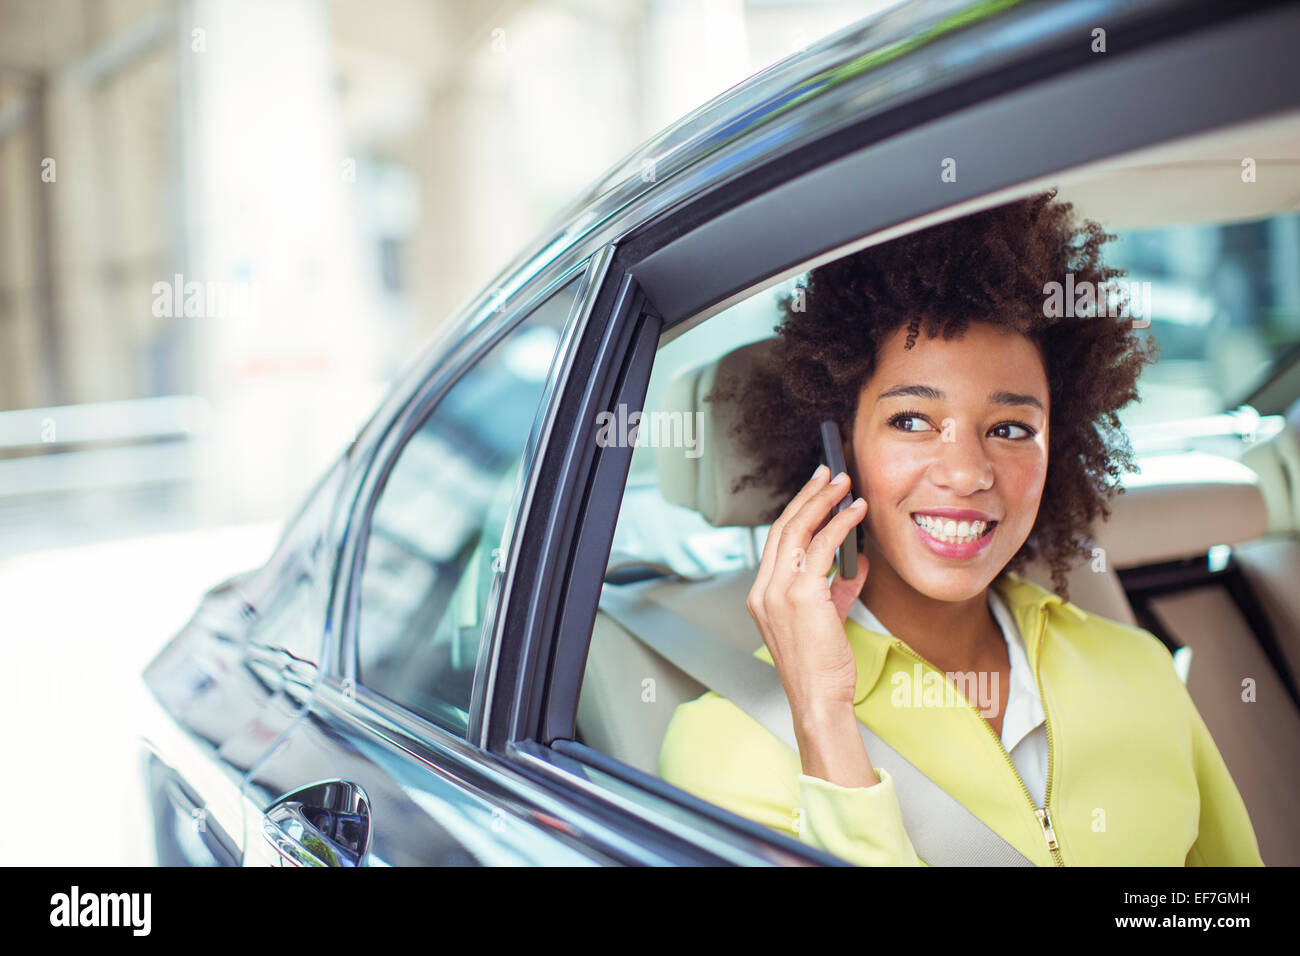 Businesswoman talking on cell phone in back seat of car Banque D'Images